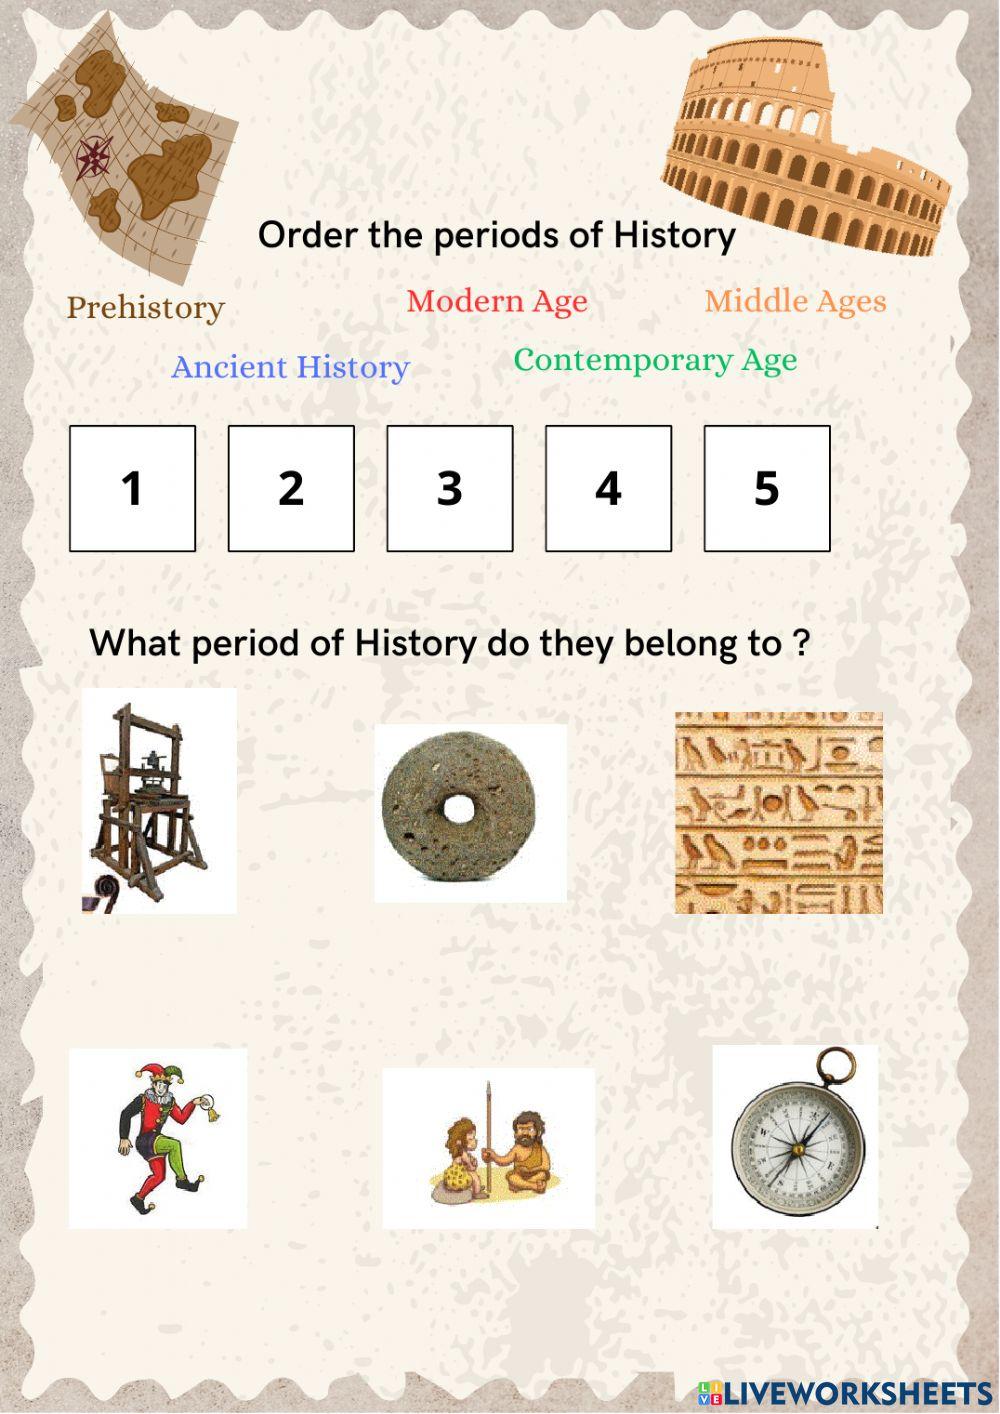 Periods of history